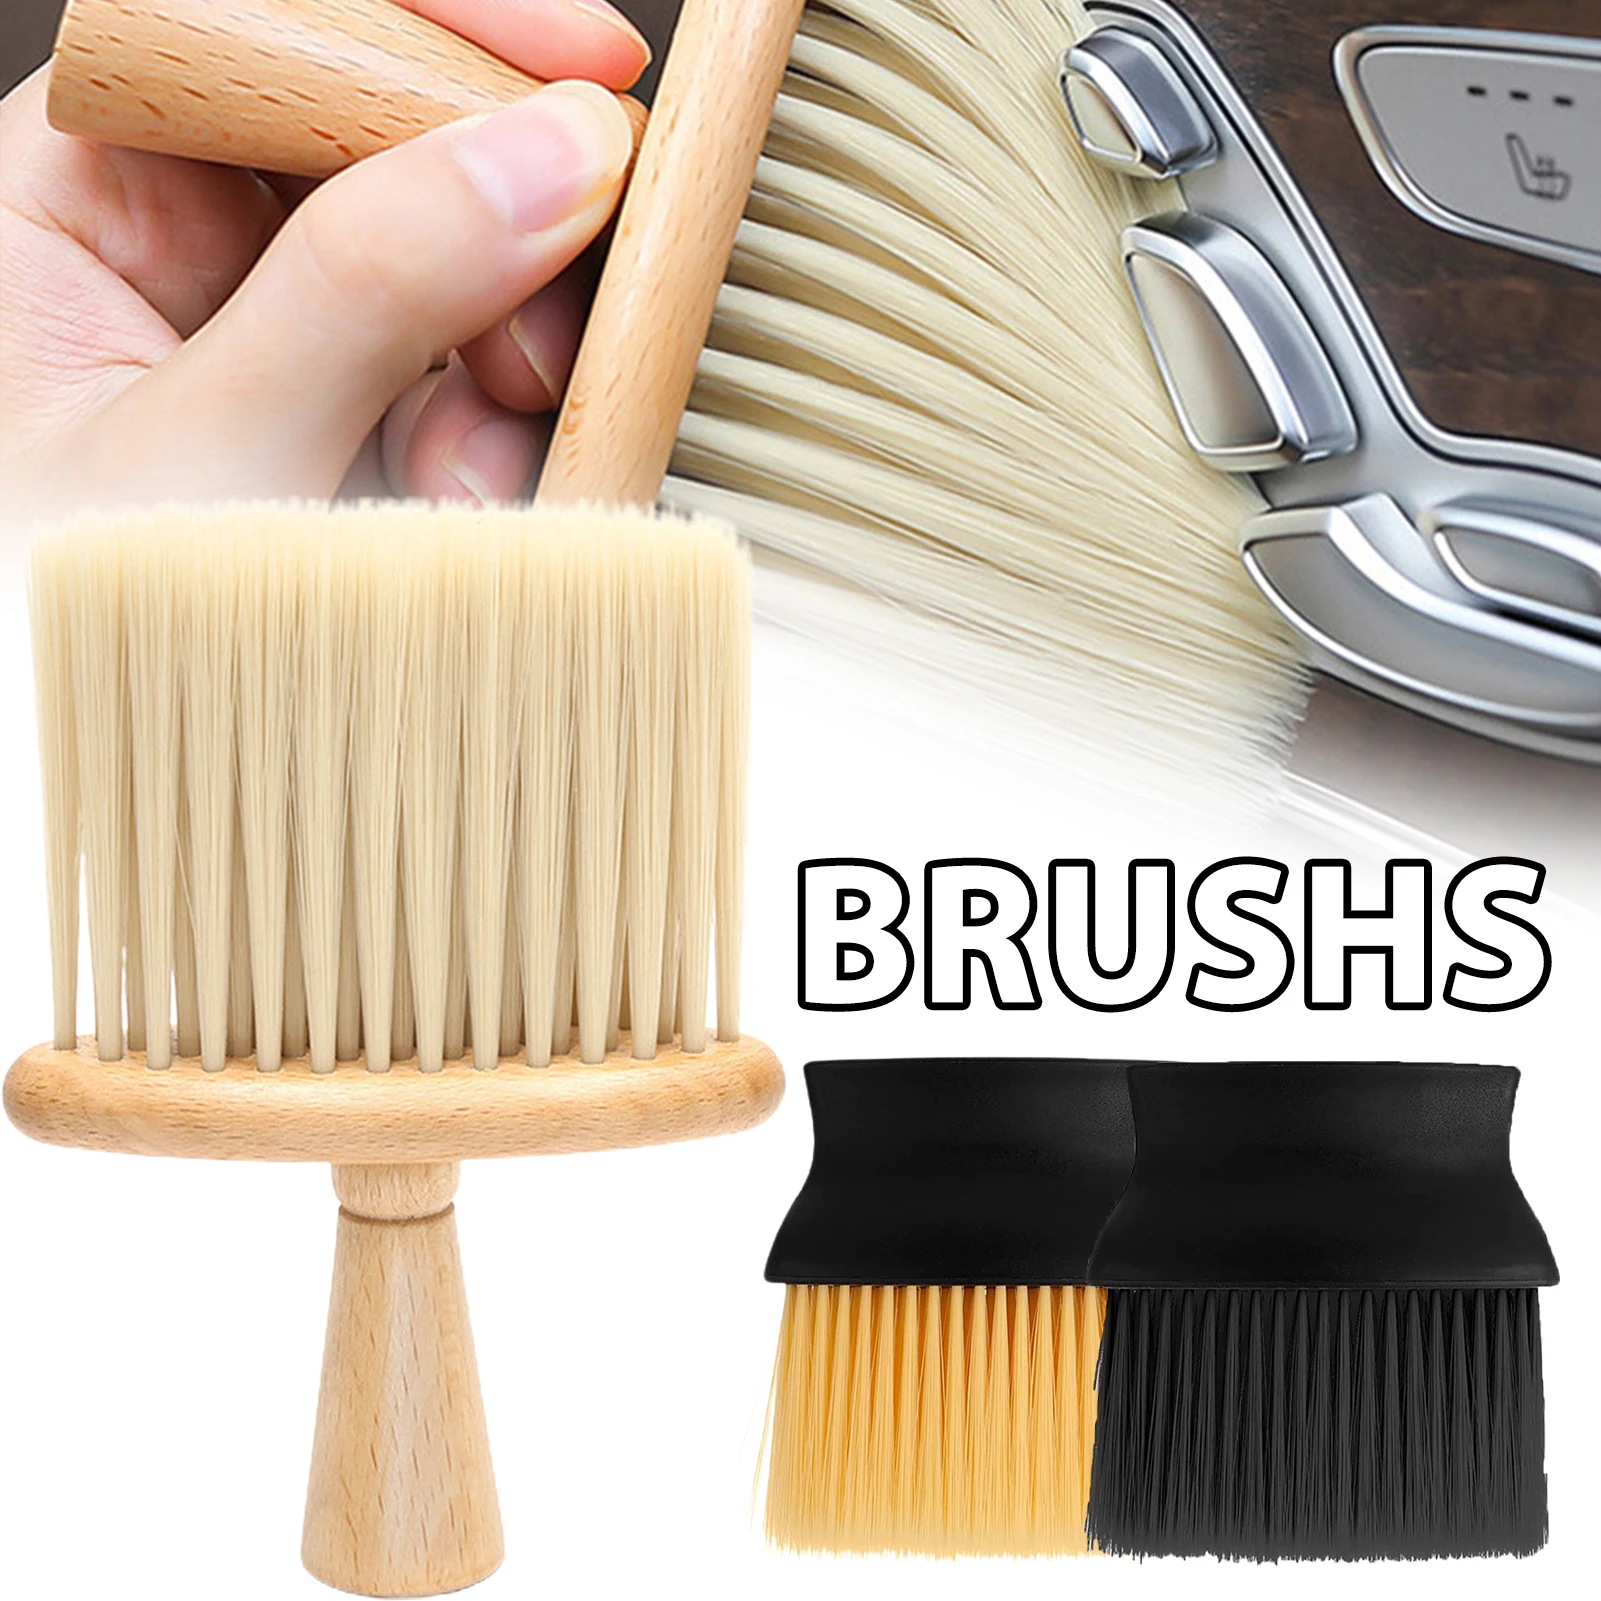 

Car Interior Dust Brush Soft Bristles Detailing Brush Dusting Tool Scratch Free for Window Slit Wood with Handle Dusting PI669